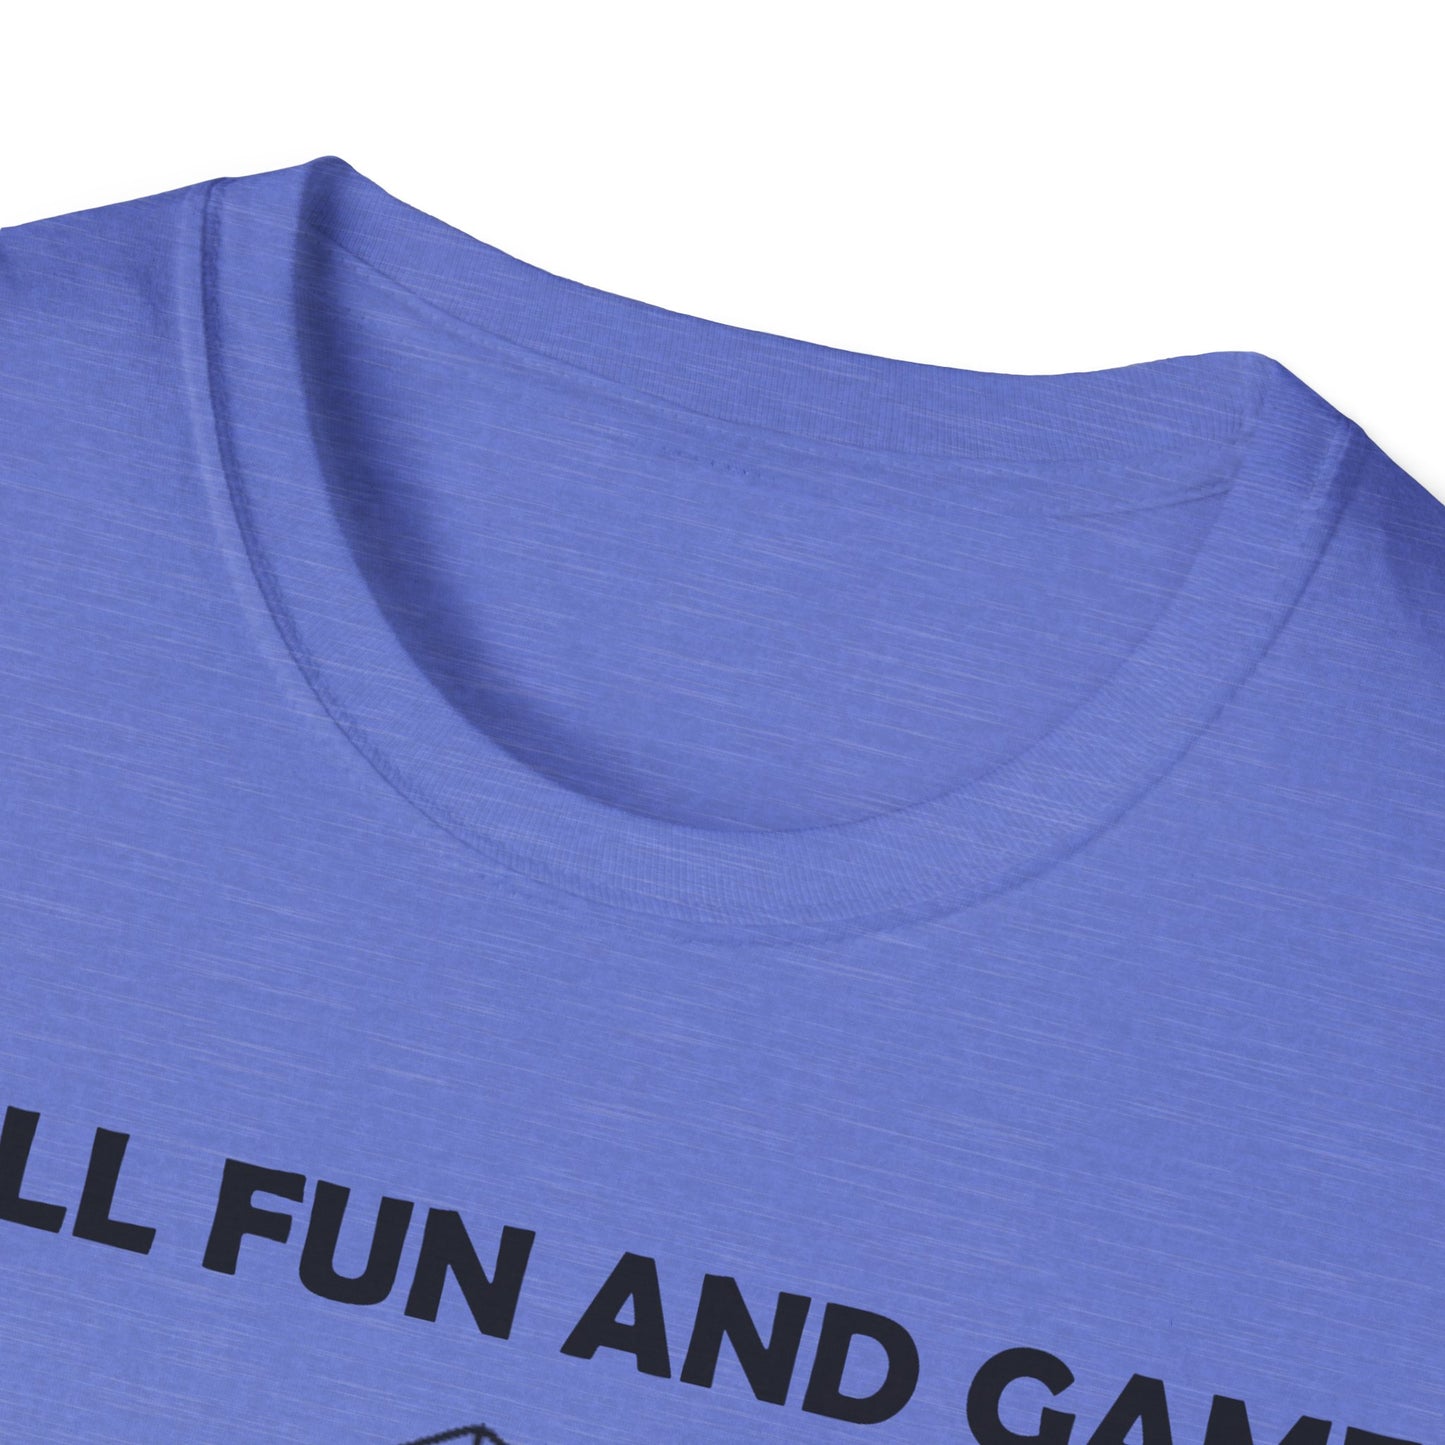 All fun and games - Black - Unisex Softstyle T-Shirt